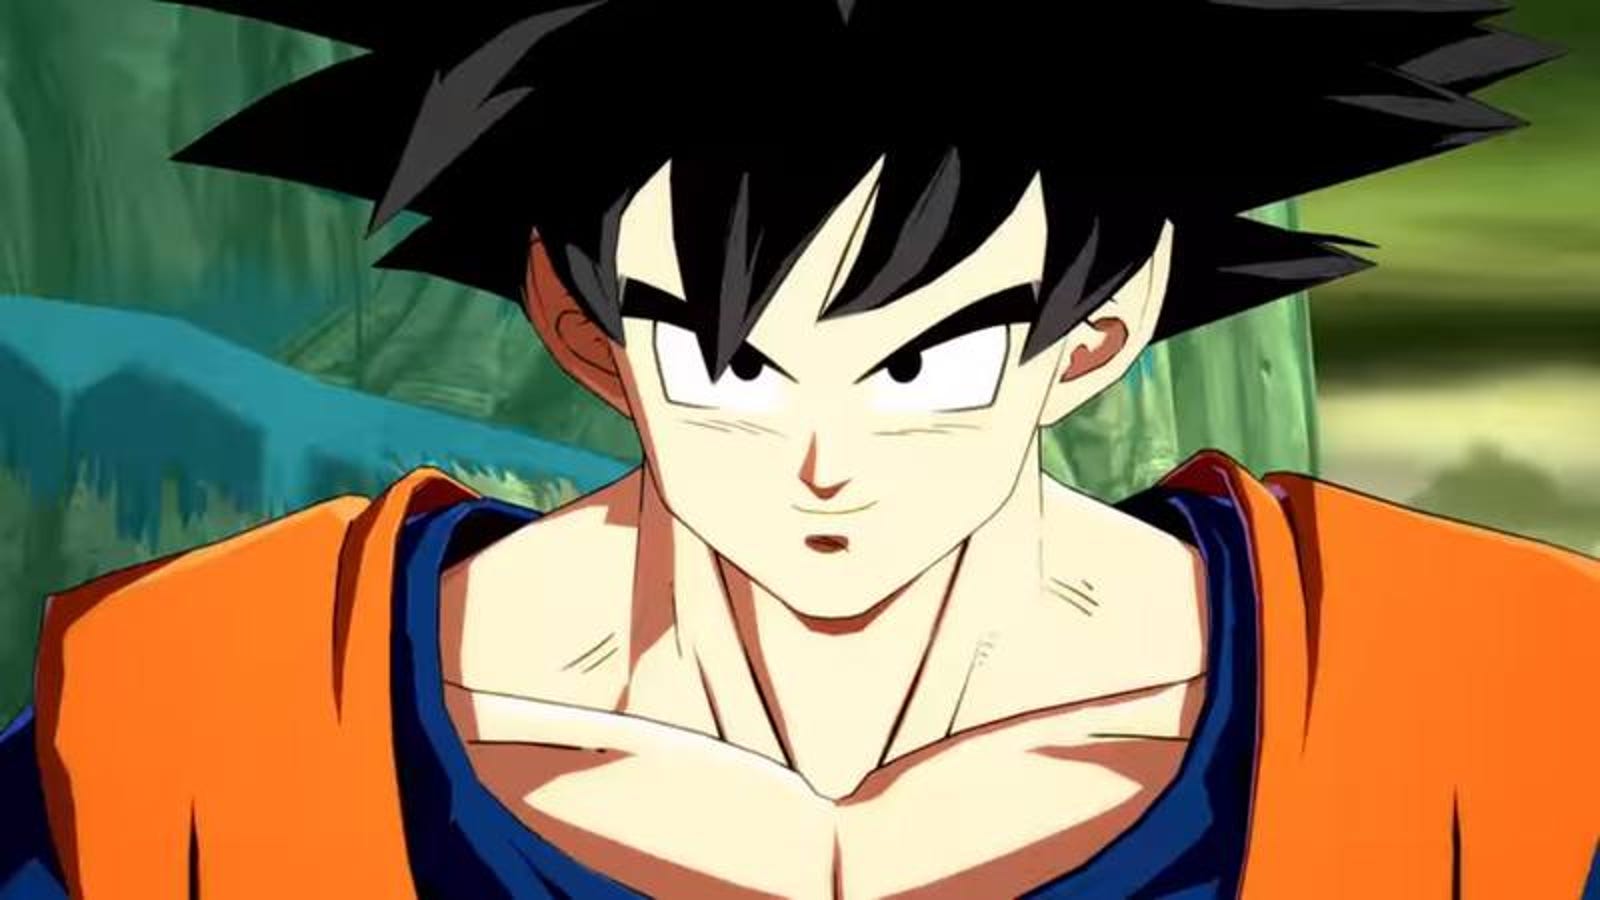 There's a new Dragon Ball Z fighting game, and it looks bonkers